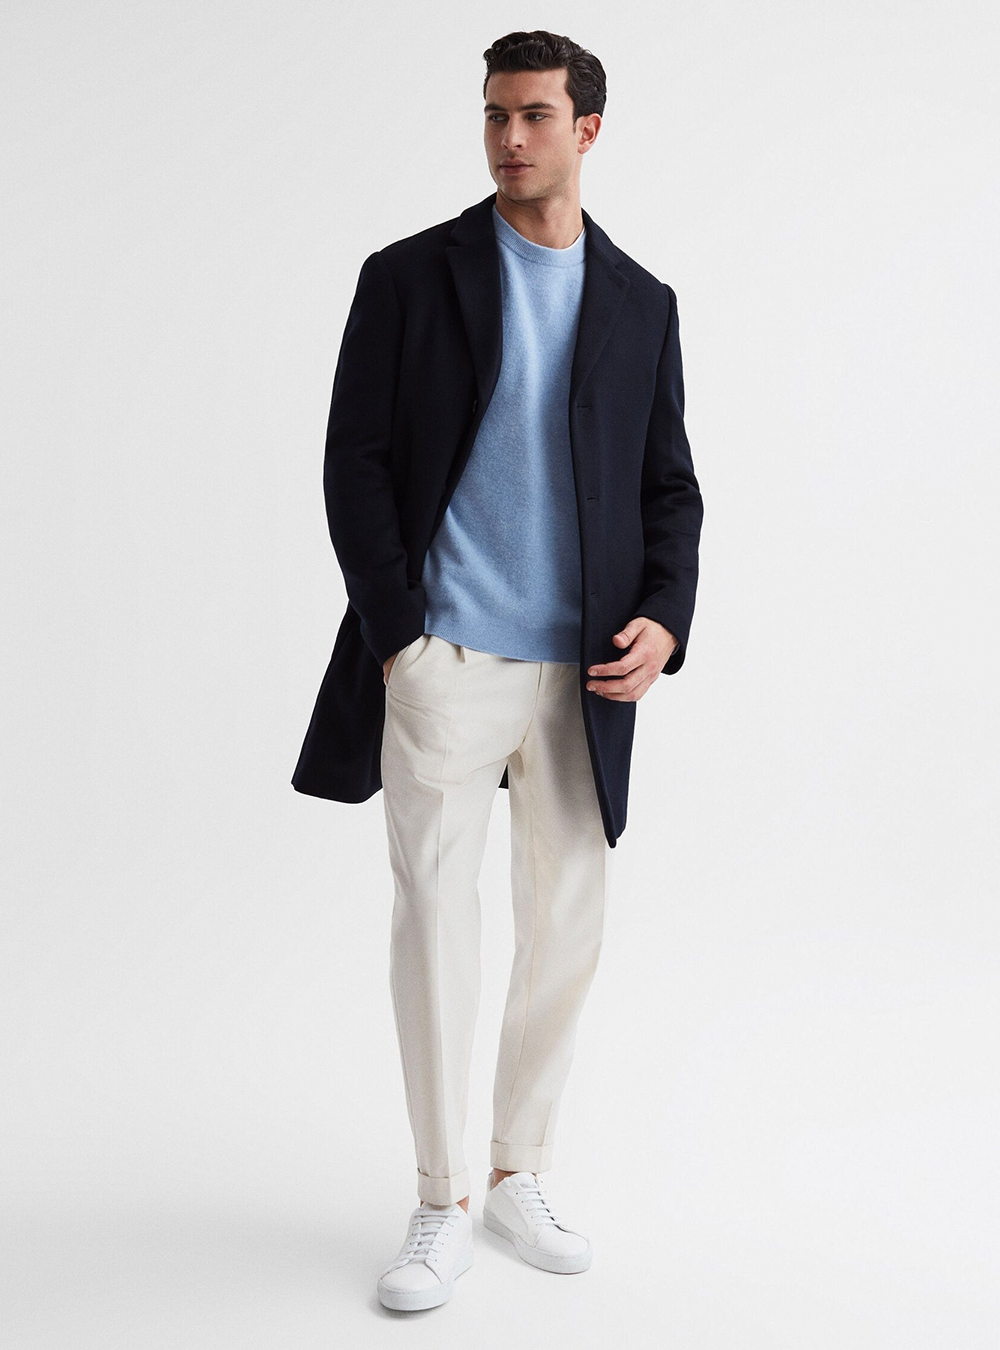 navy overcoat, blue sweater, off-white chinos, and white sneakers